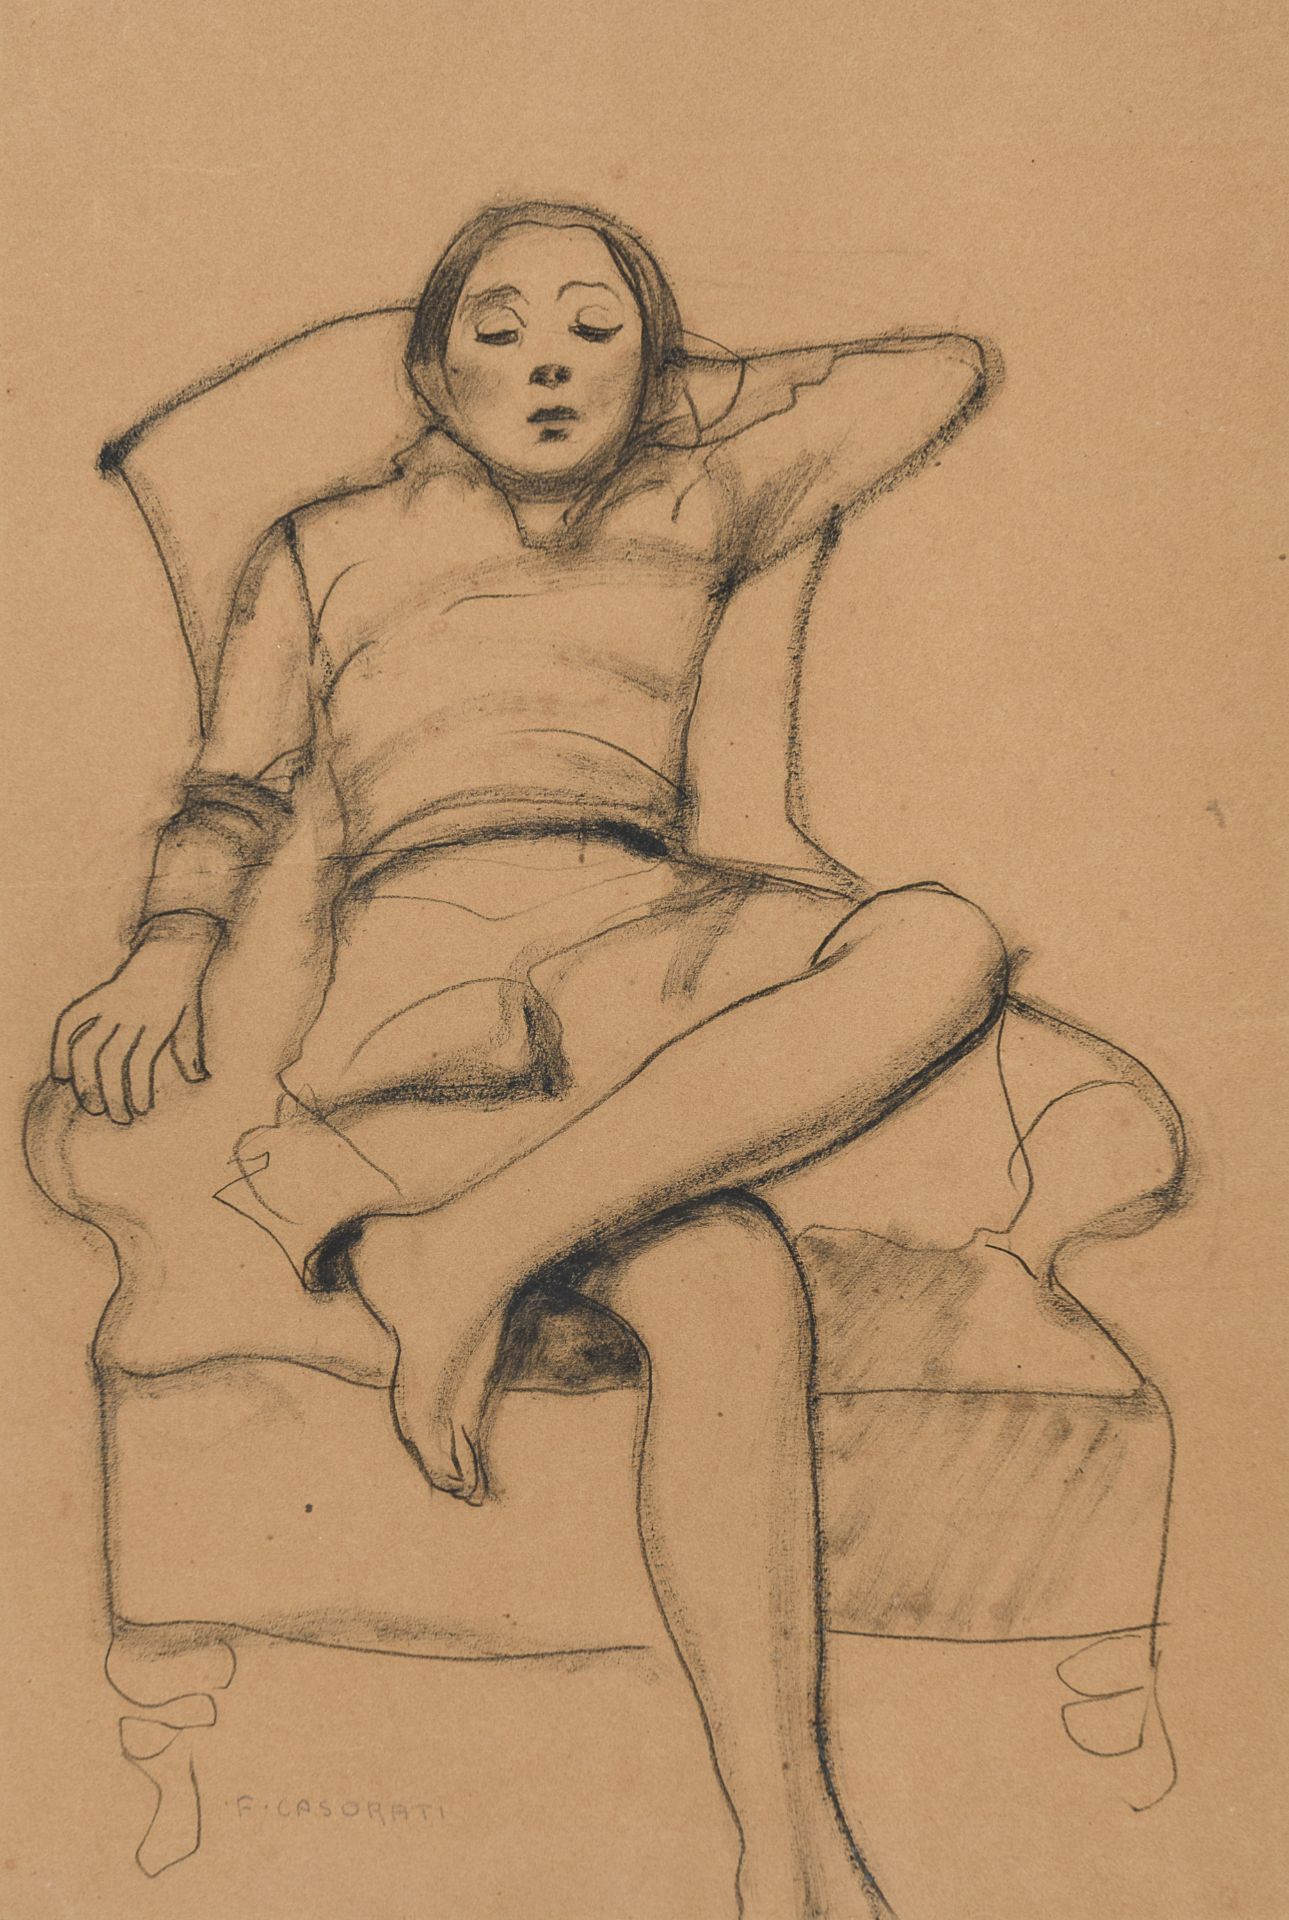 PENCIL DRAWING OF A SEATED GIRL BY FELICE CASORATI 1929